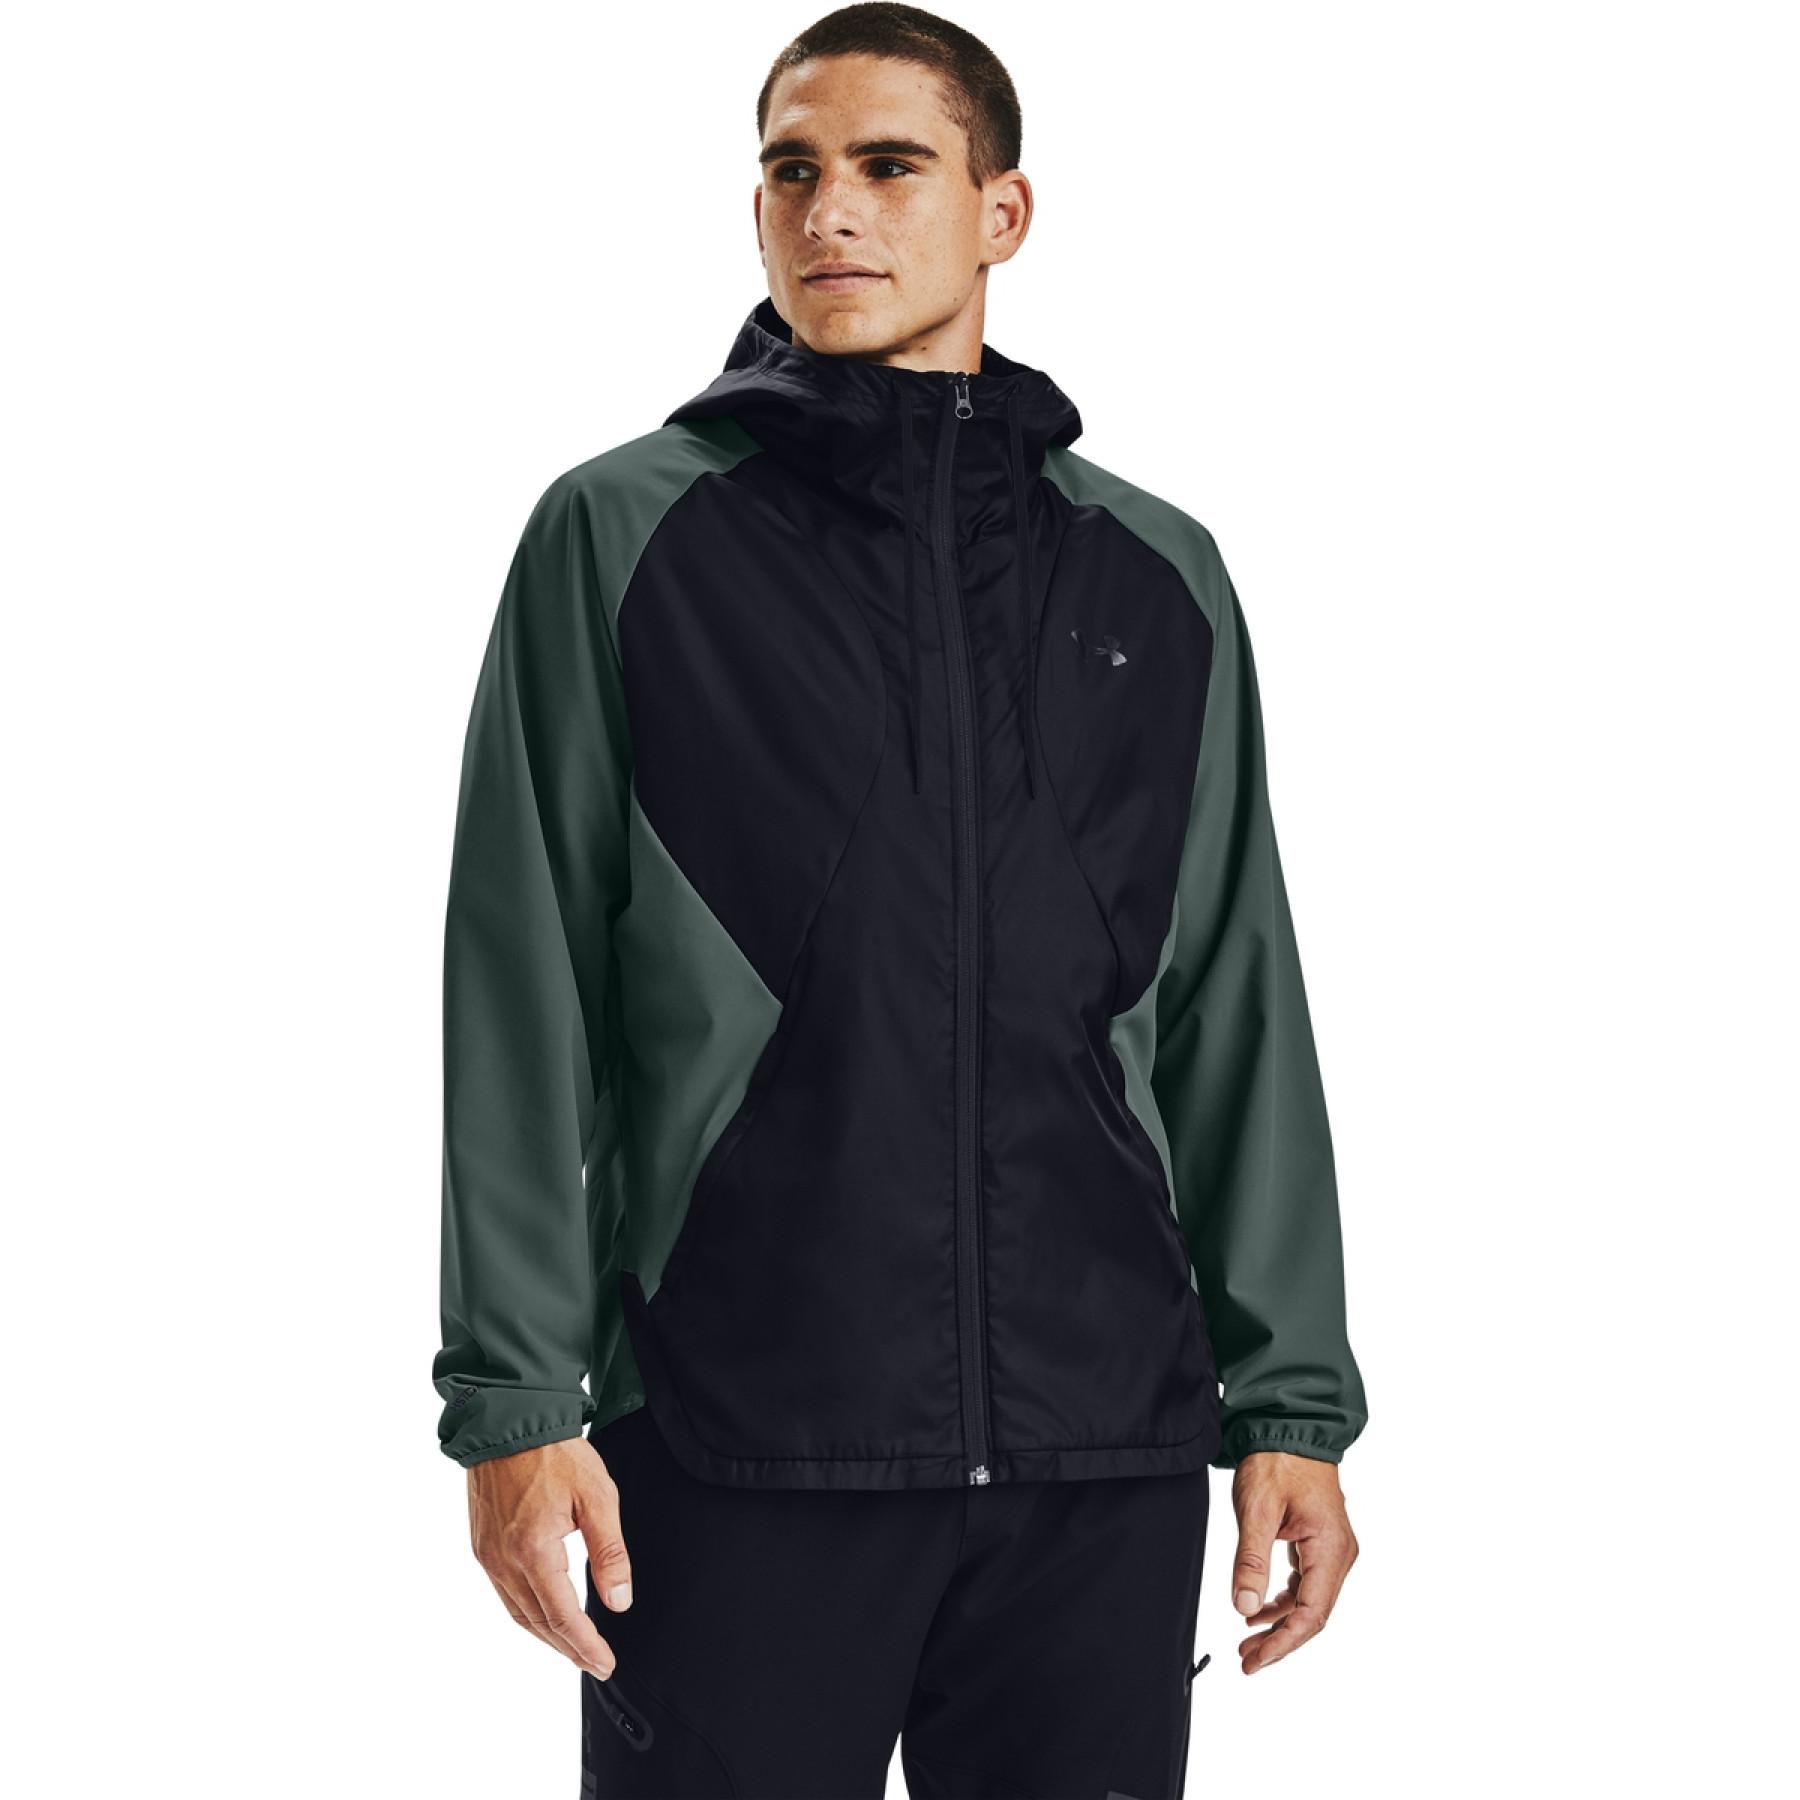 Jacket Under Armour Stretch Woven Full Zip